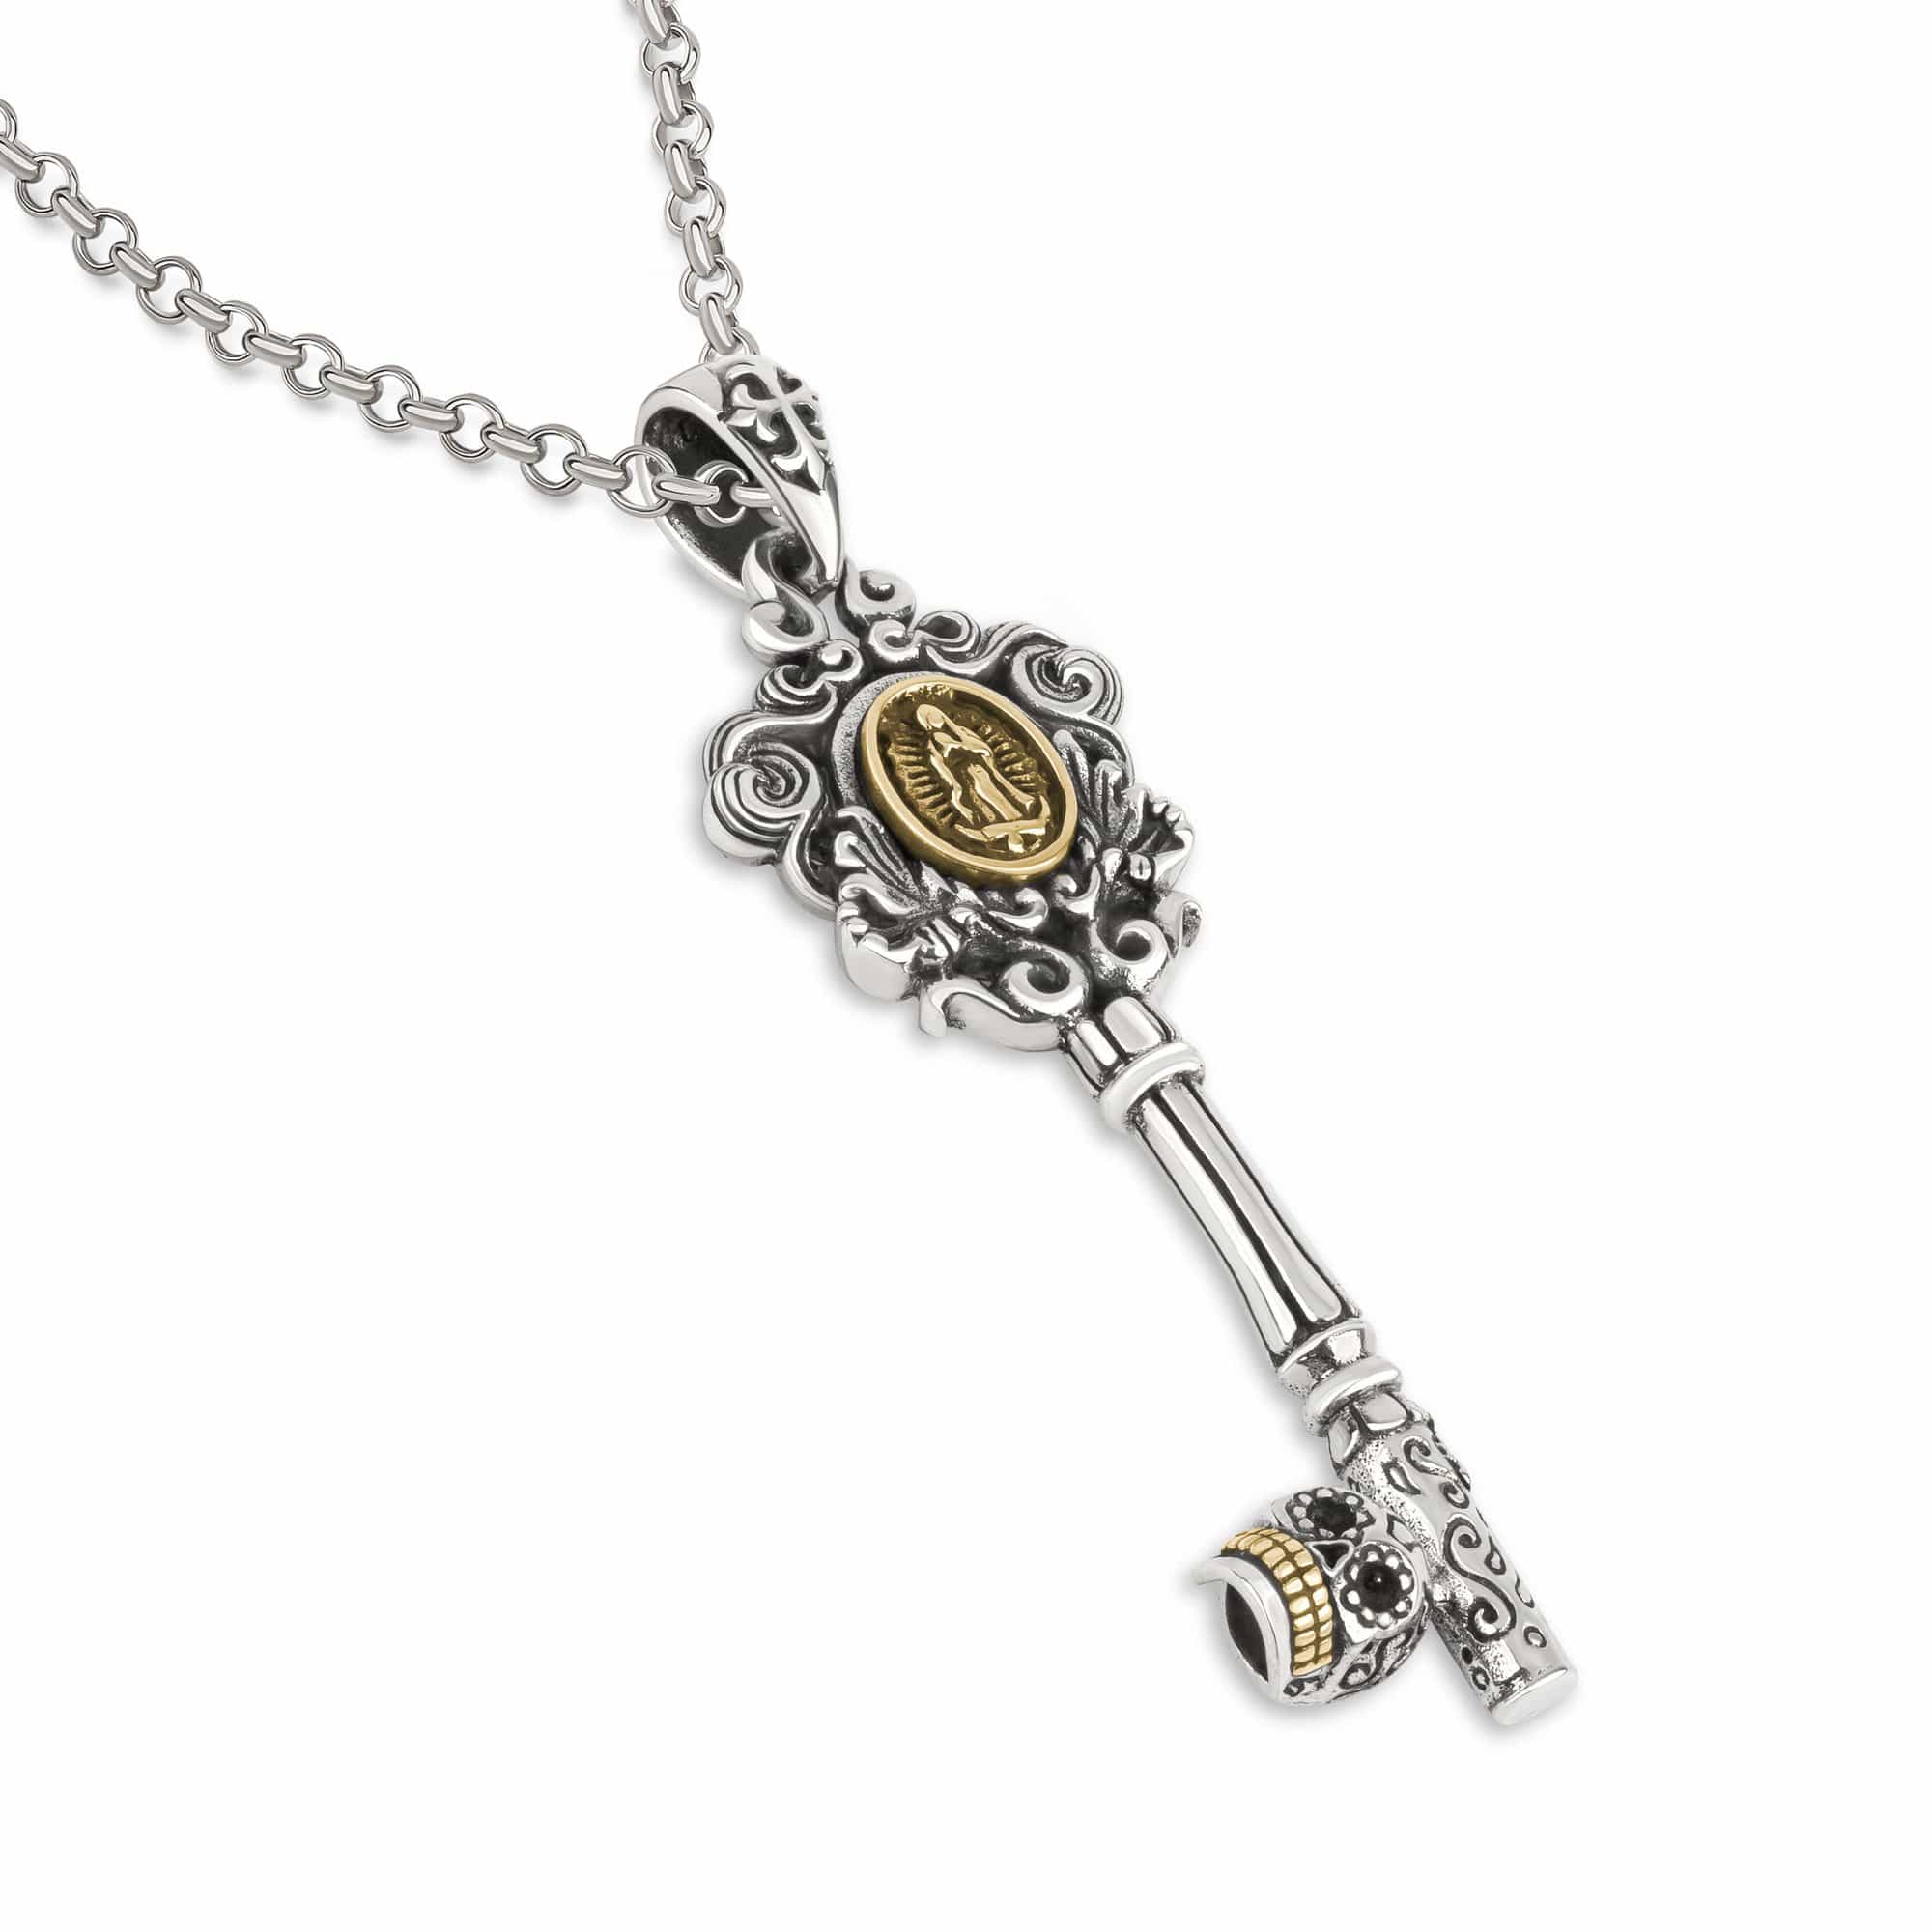 The key necklace - Sterling Silver